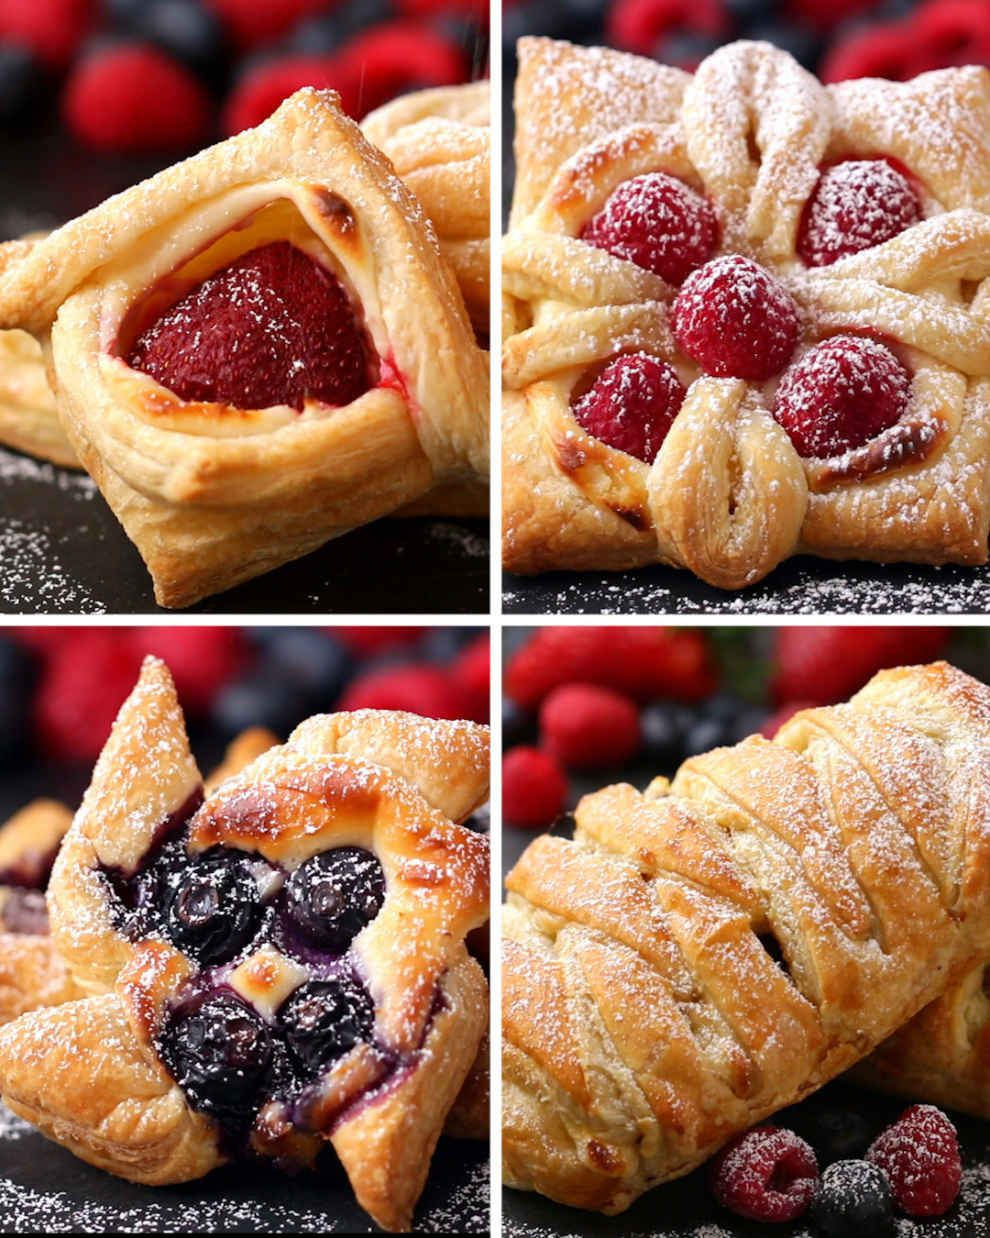 Puff Pastry Desserts With Cream Cheese
 The 25 best Cream cheese puff pastry ideas on Pinterest